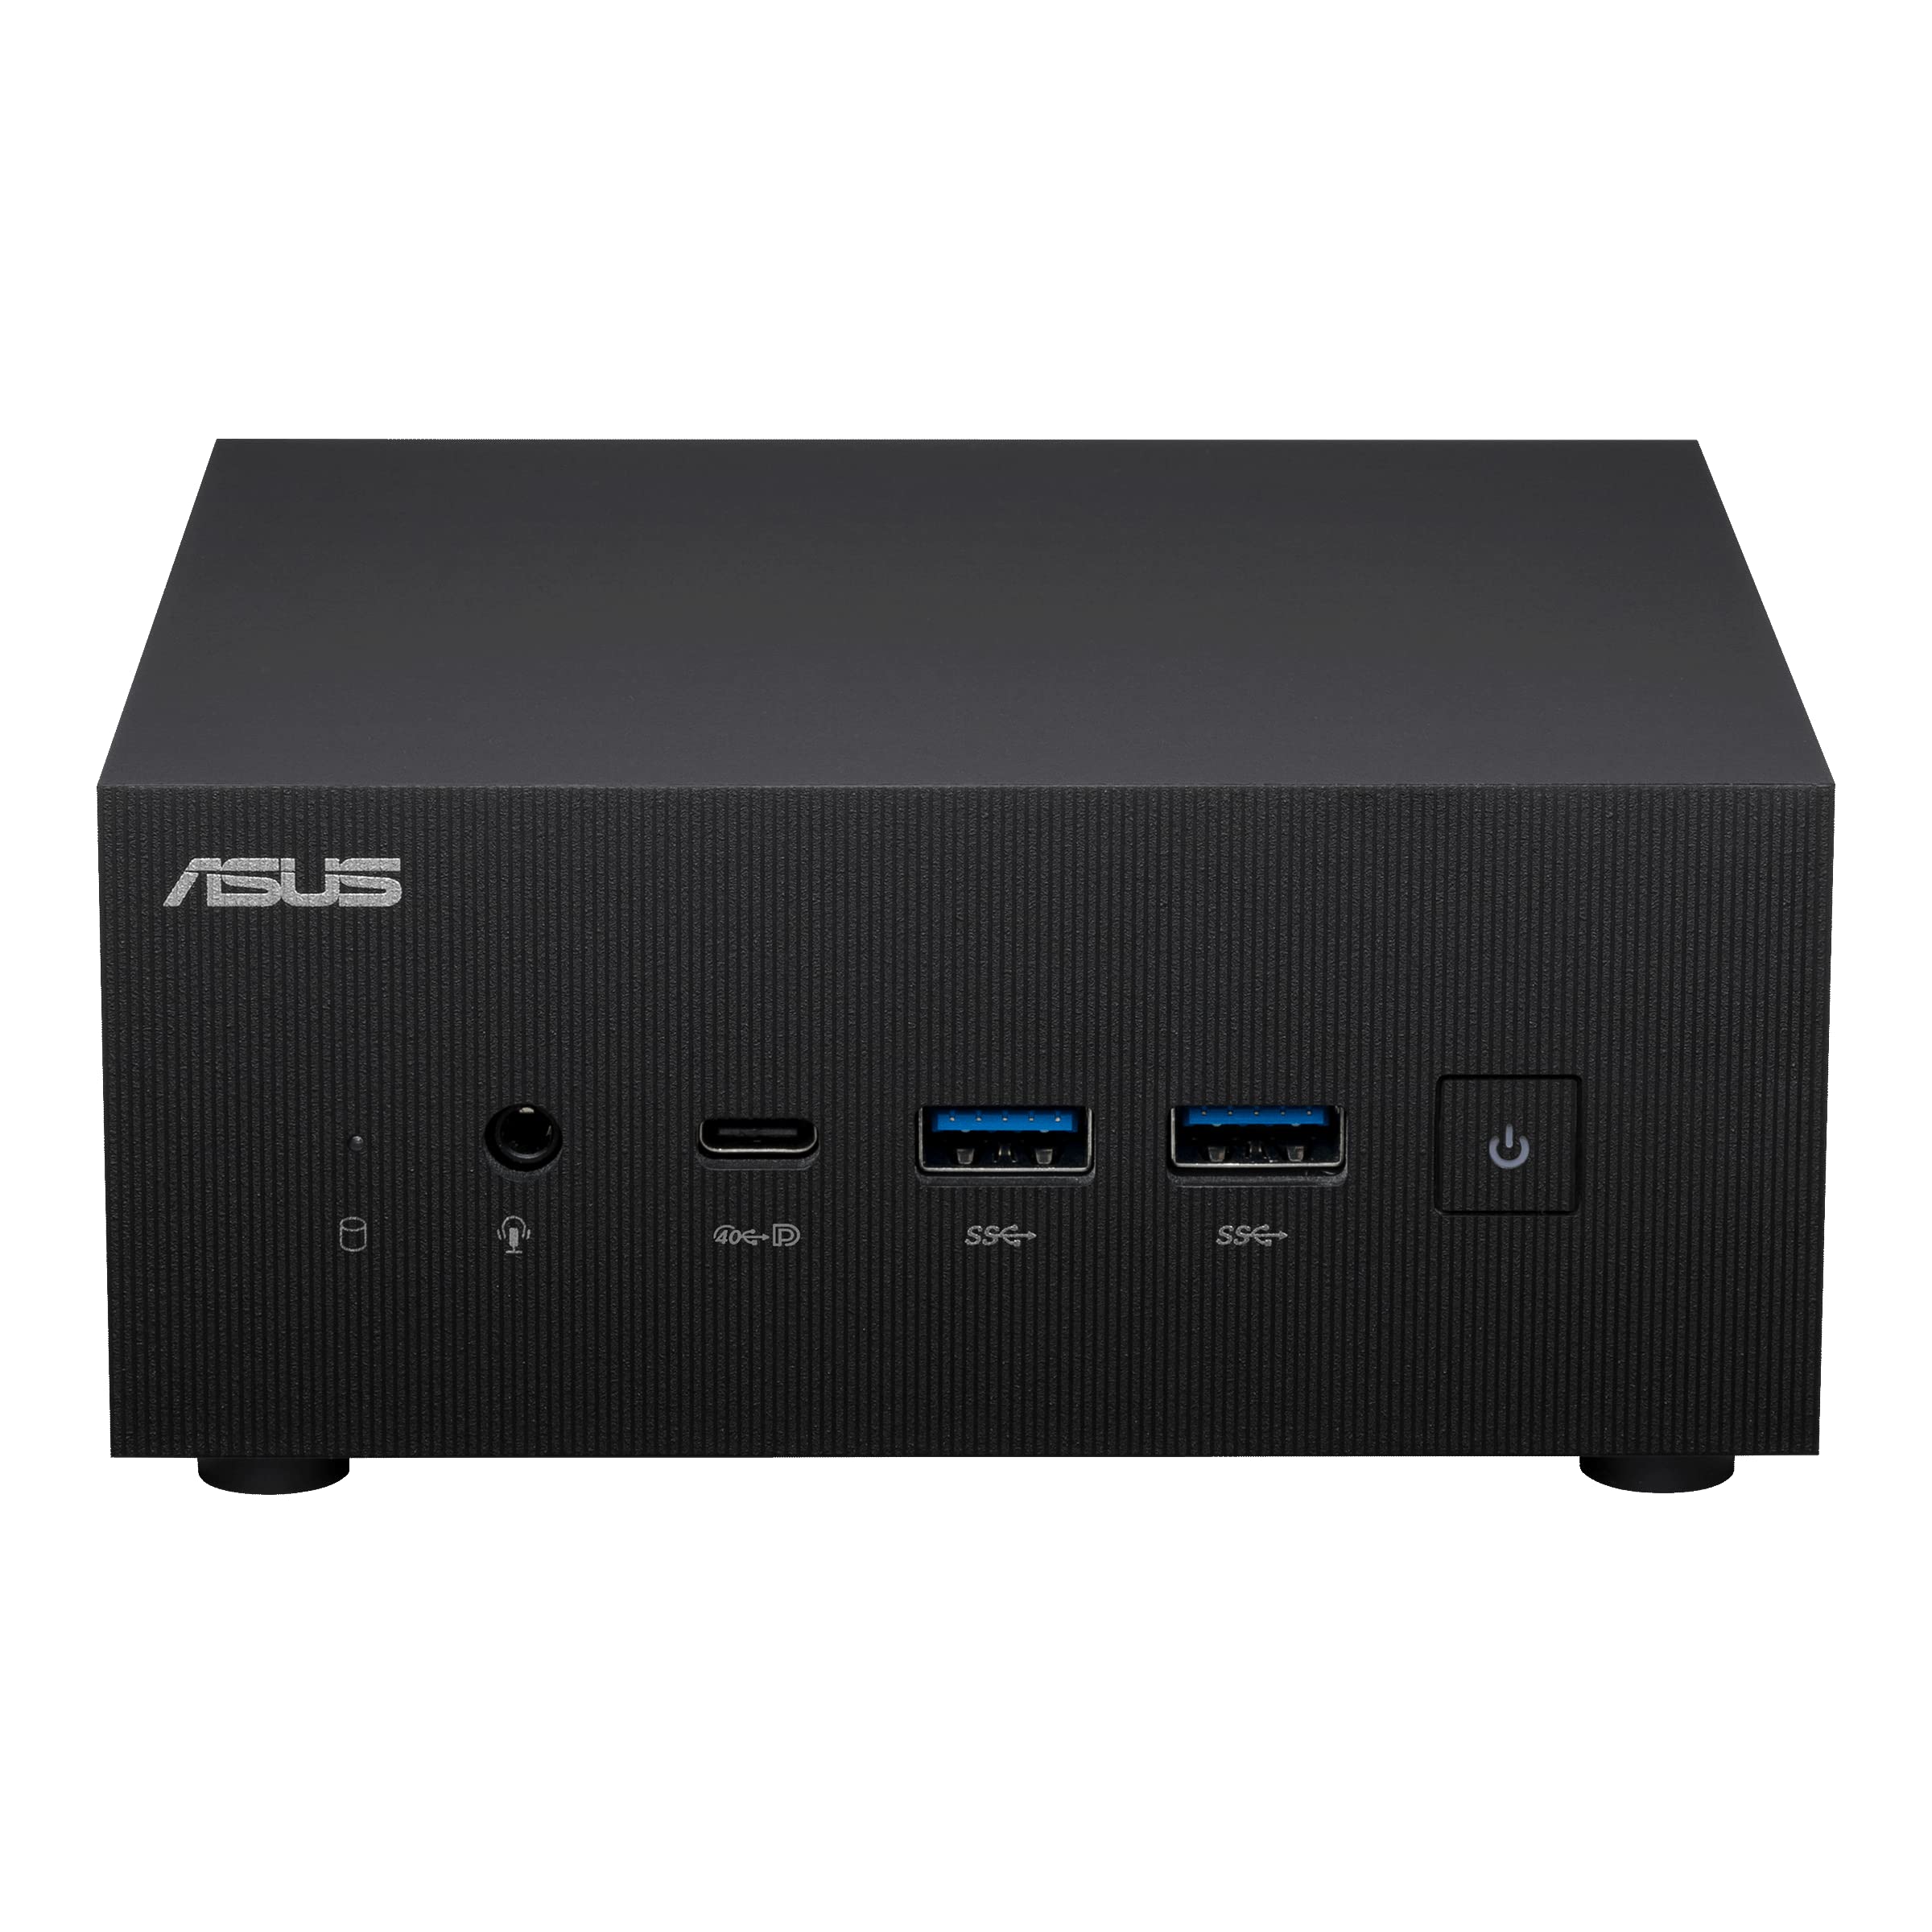 ASUS ExpertCenter PN53 Mini PC System with The Newest AMD Ryzen™ 5 7535HS Processor, Supports up to Four 4K-displays, 8GB DDR5 RAM, M.2 PCIE G4 256GB SSD, WiFi 6E, Bluetooth, 7 x USB, Windows 11 Pro